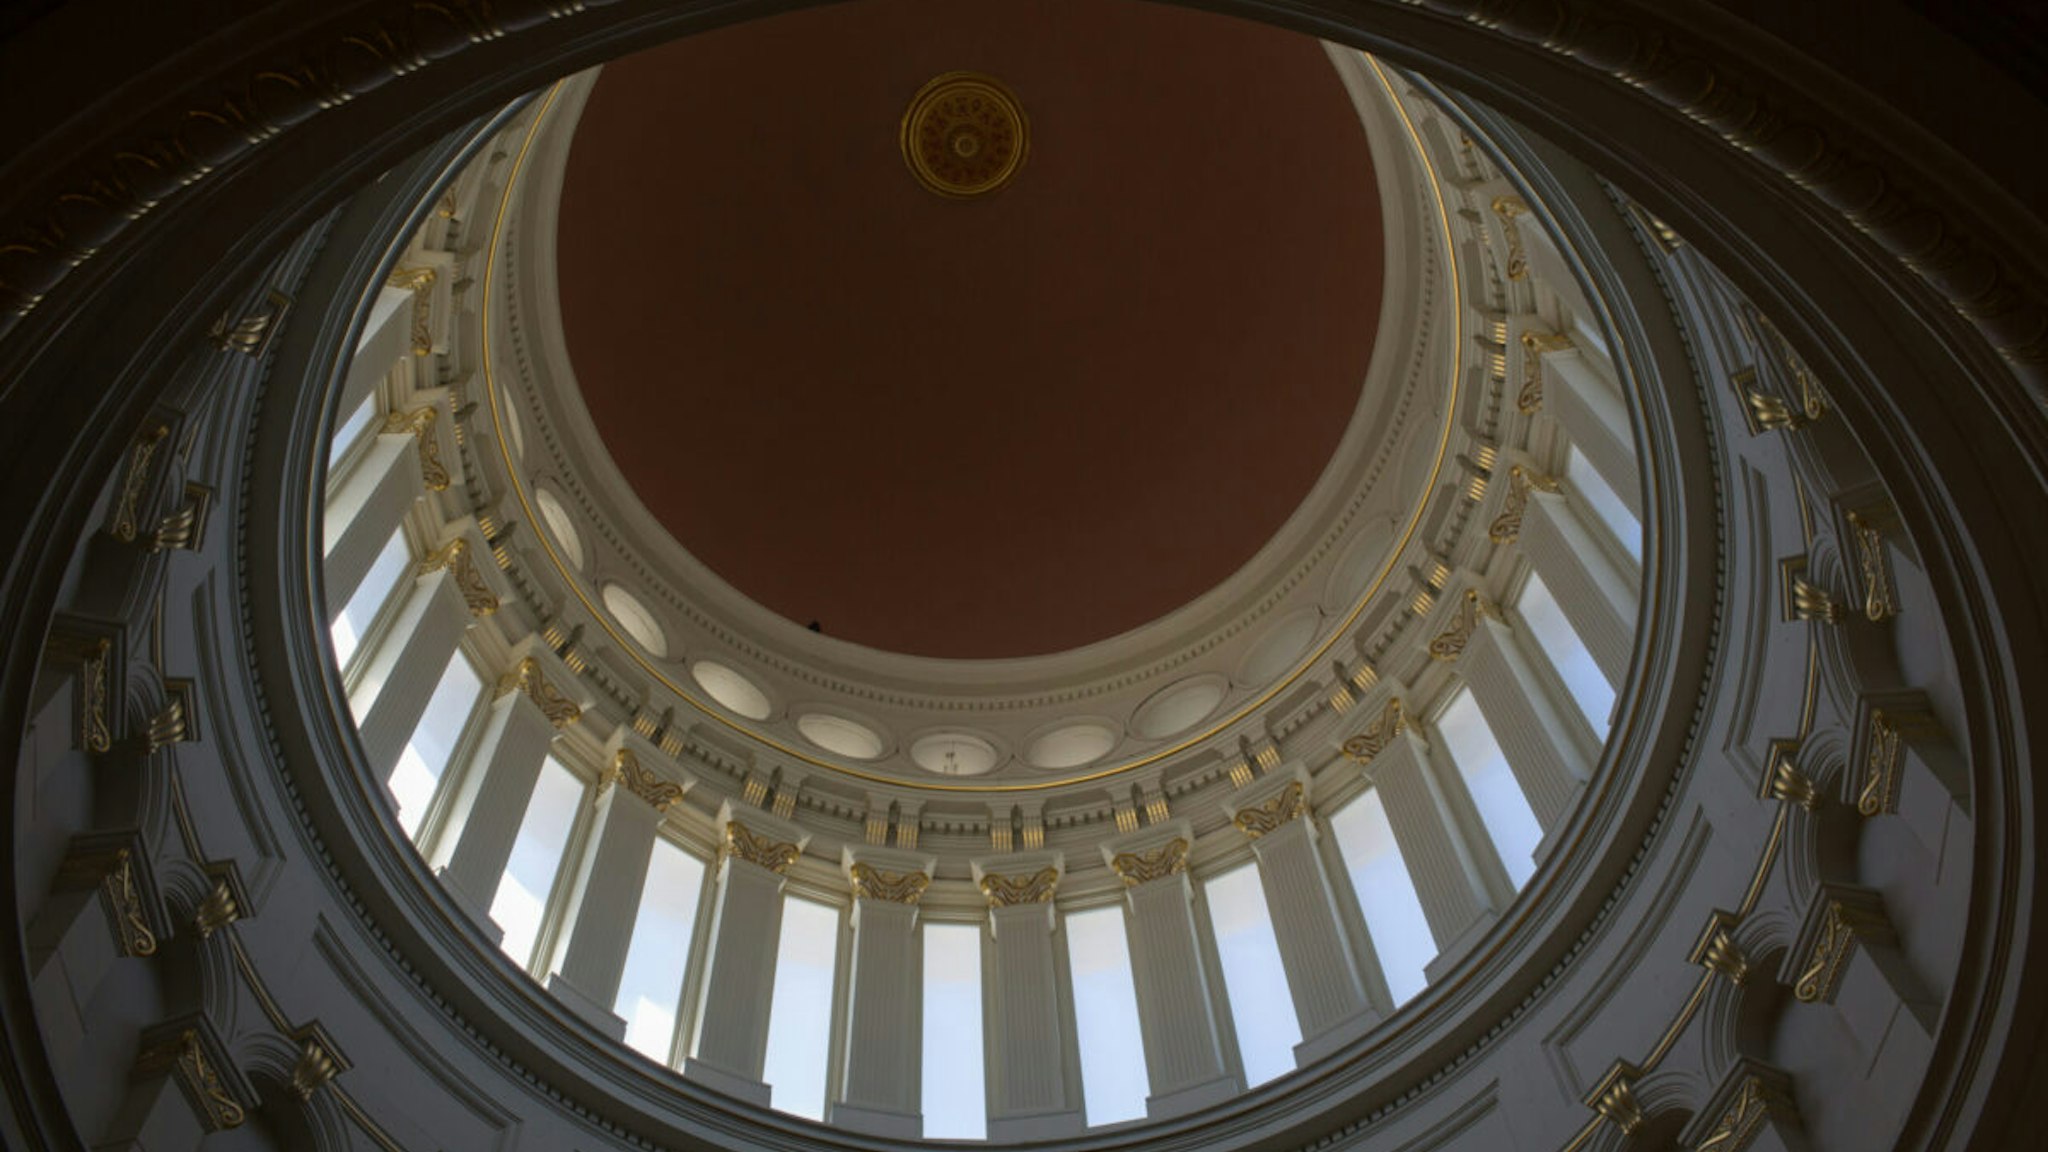 The rotunda of the New Jersey State Capitol building is seen during renovations in Trenton, New Jersey, U.S., on Thursday, May 14, 2018.